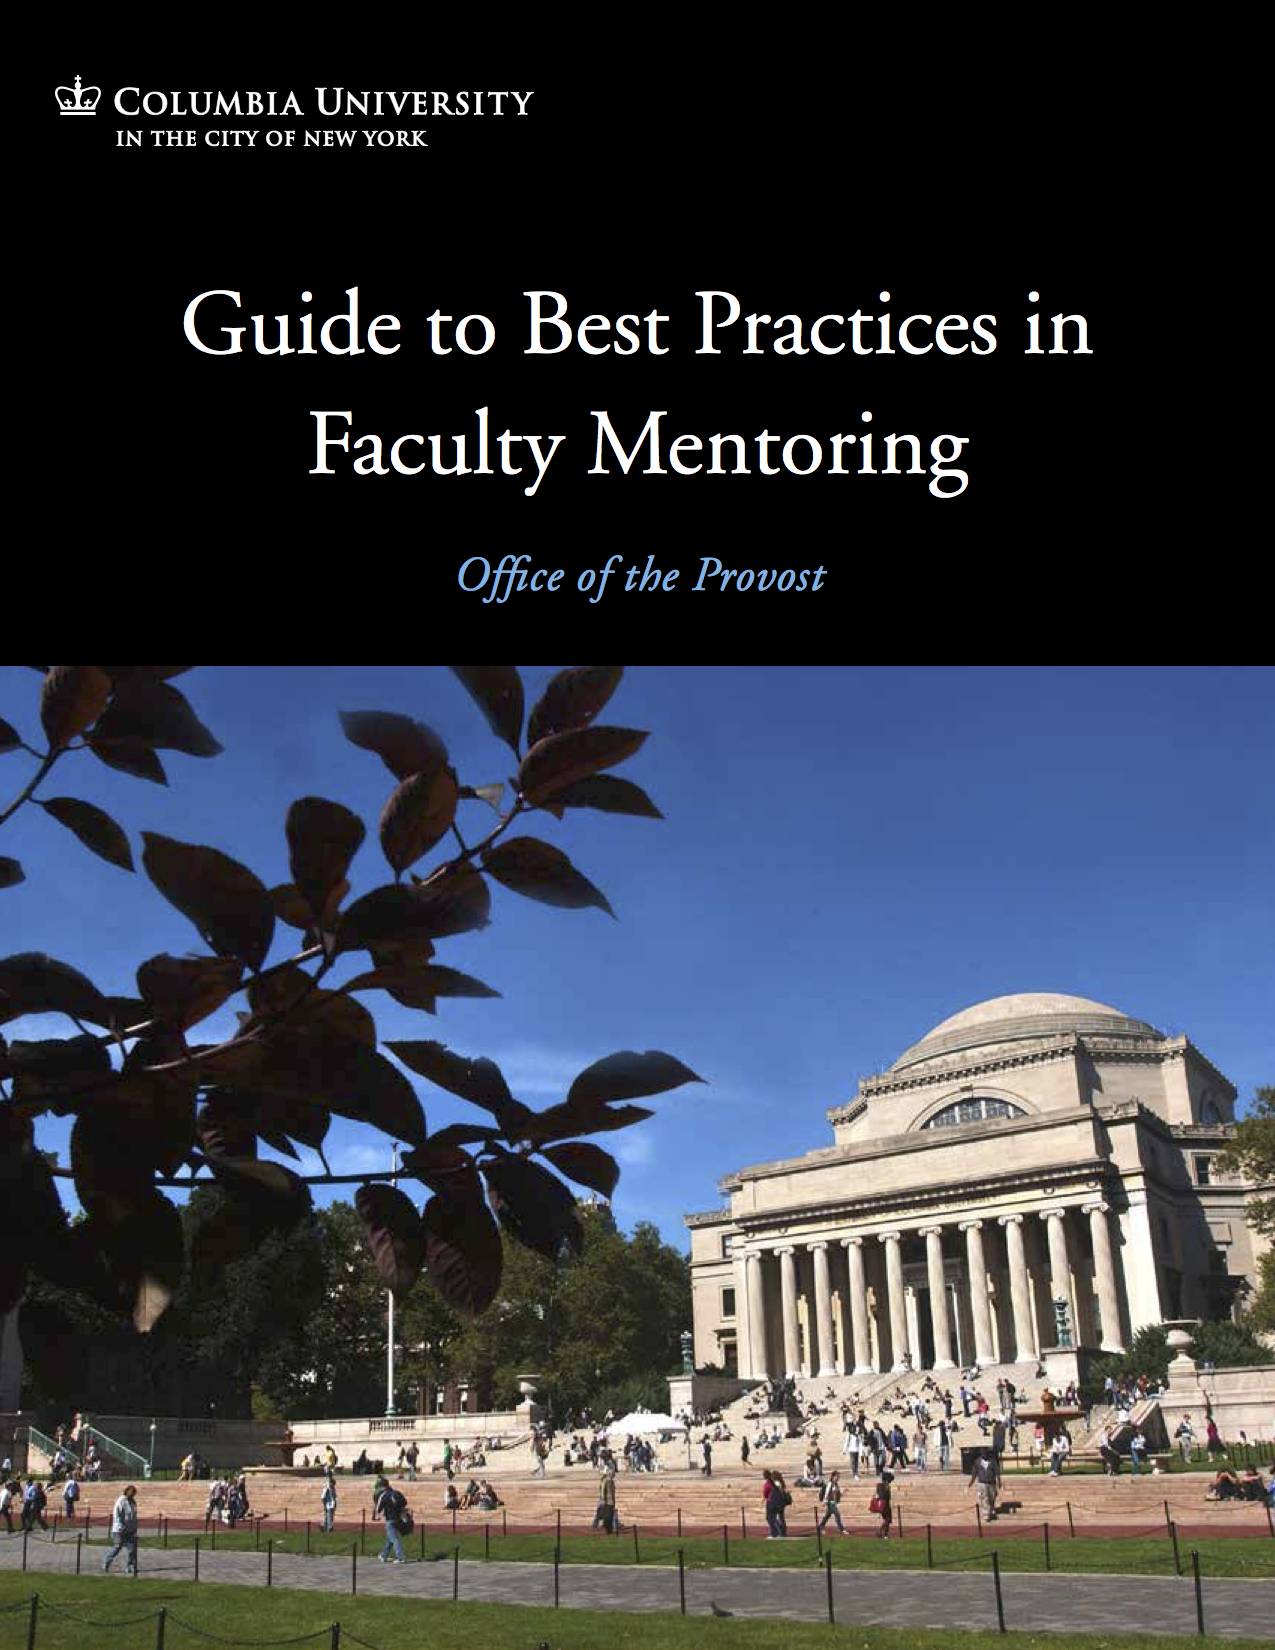 Photo of Low Library with leaves in foreground. Text: Guide to Best Practices in Faculty Mentoring